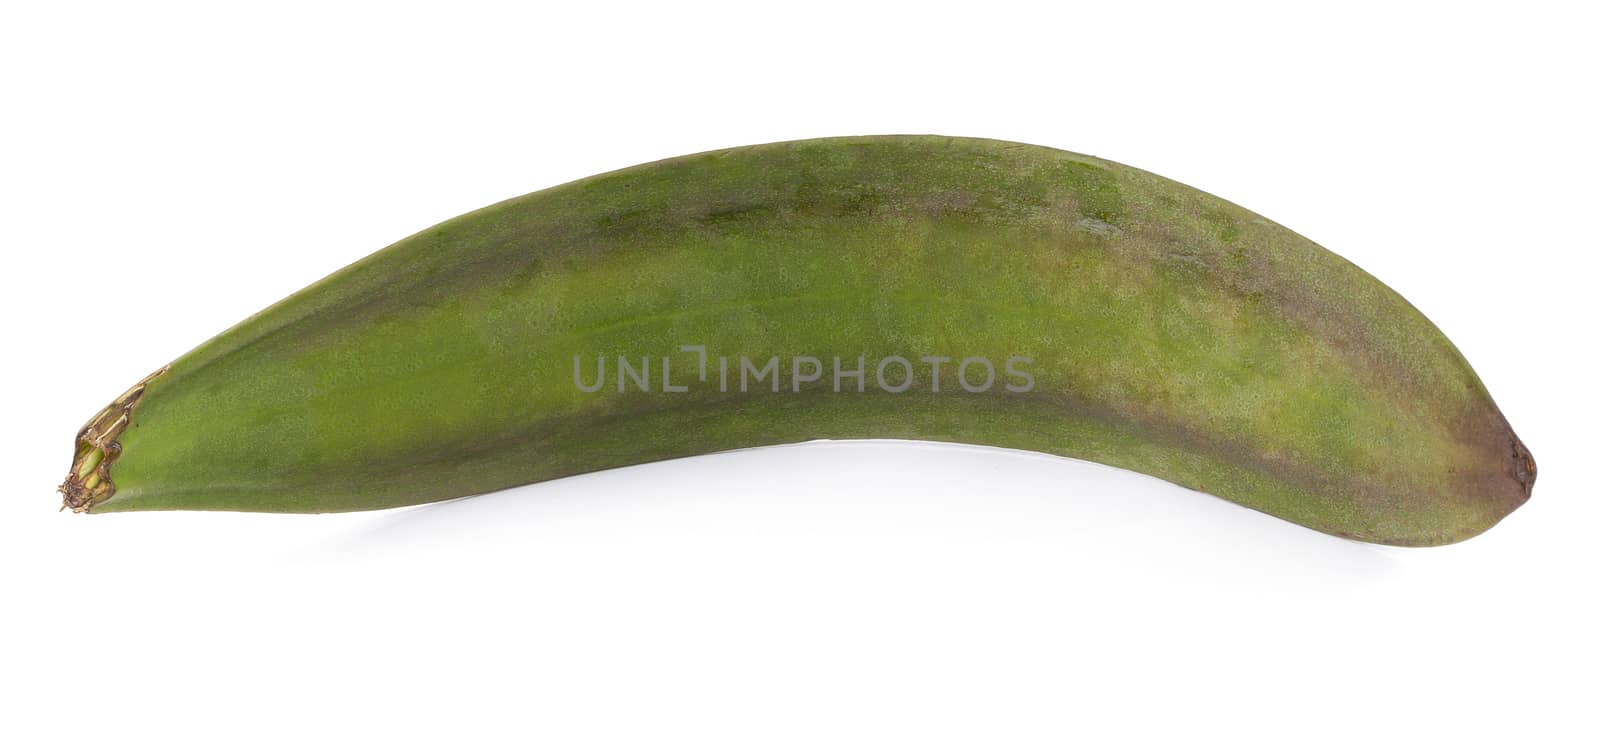 Oroxylum indicum, Eating and medicinal properties tree pod isolated on white background.